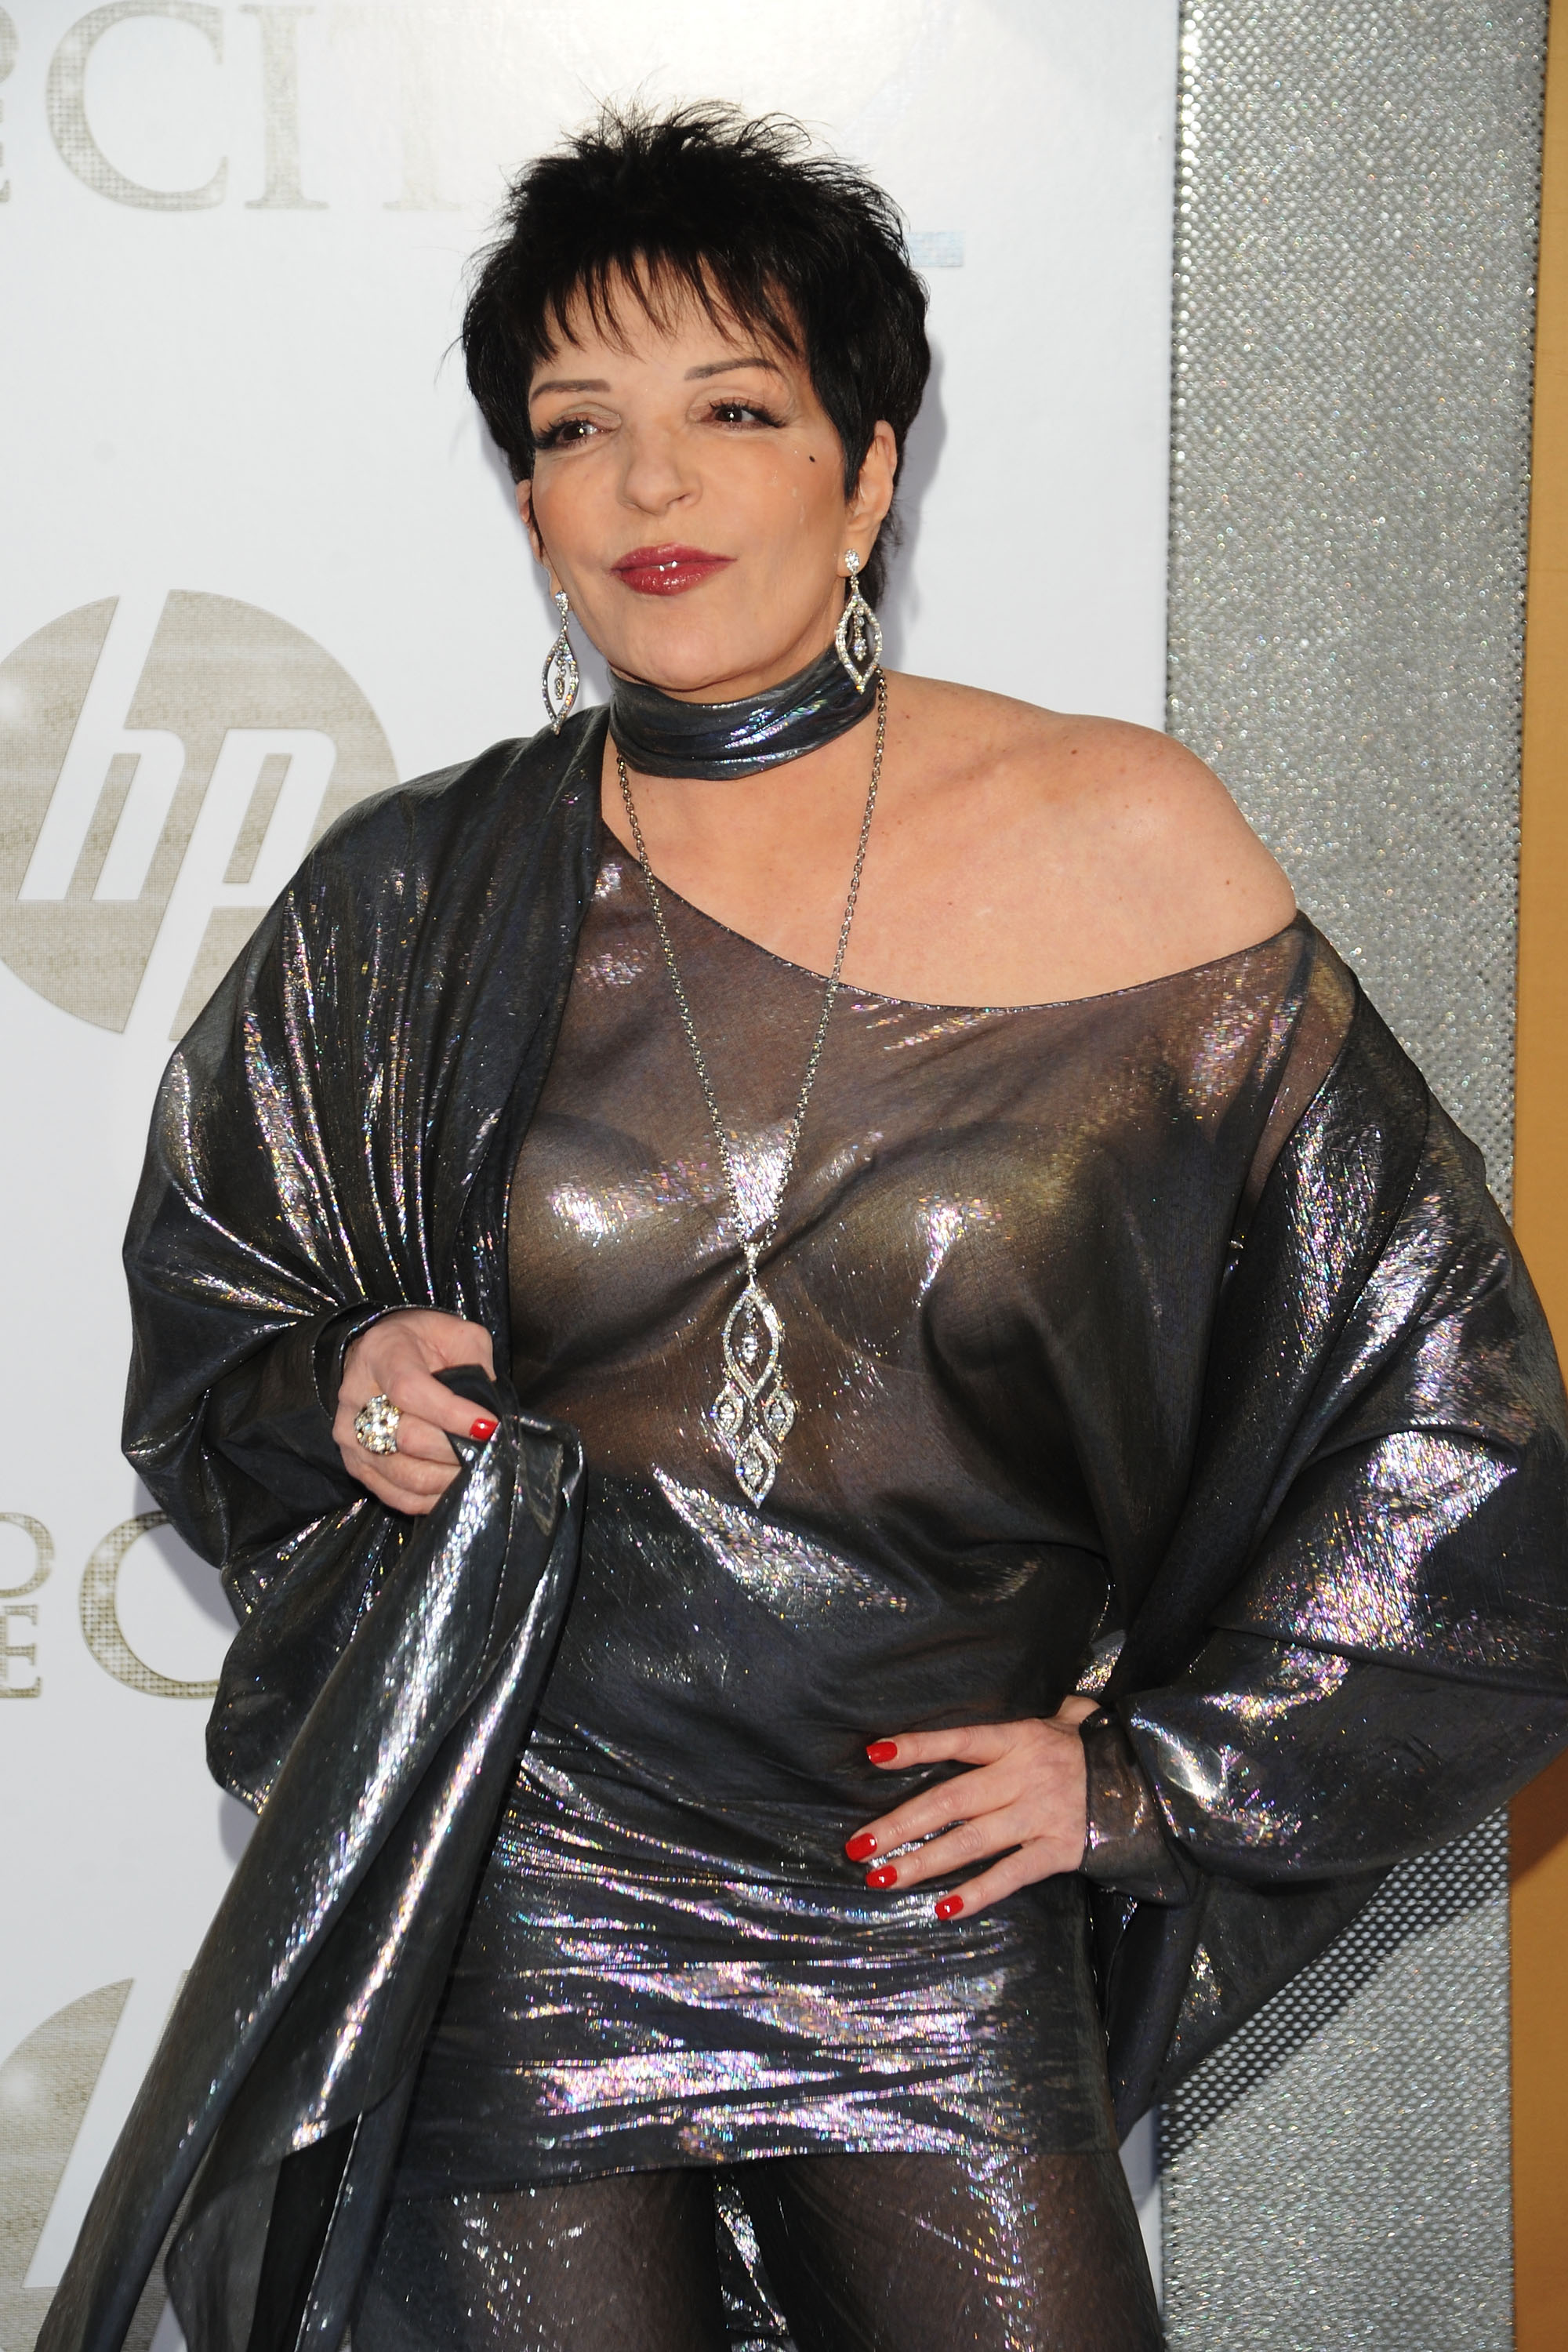 Liza Minnelli attends the premiere of "Sex And The City 2" presented by Mercedes-Benz and Maybach at Radio City Music Hall on May 24, 2010, in New York City. | Source: Getty Images